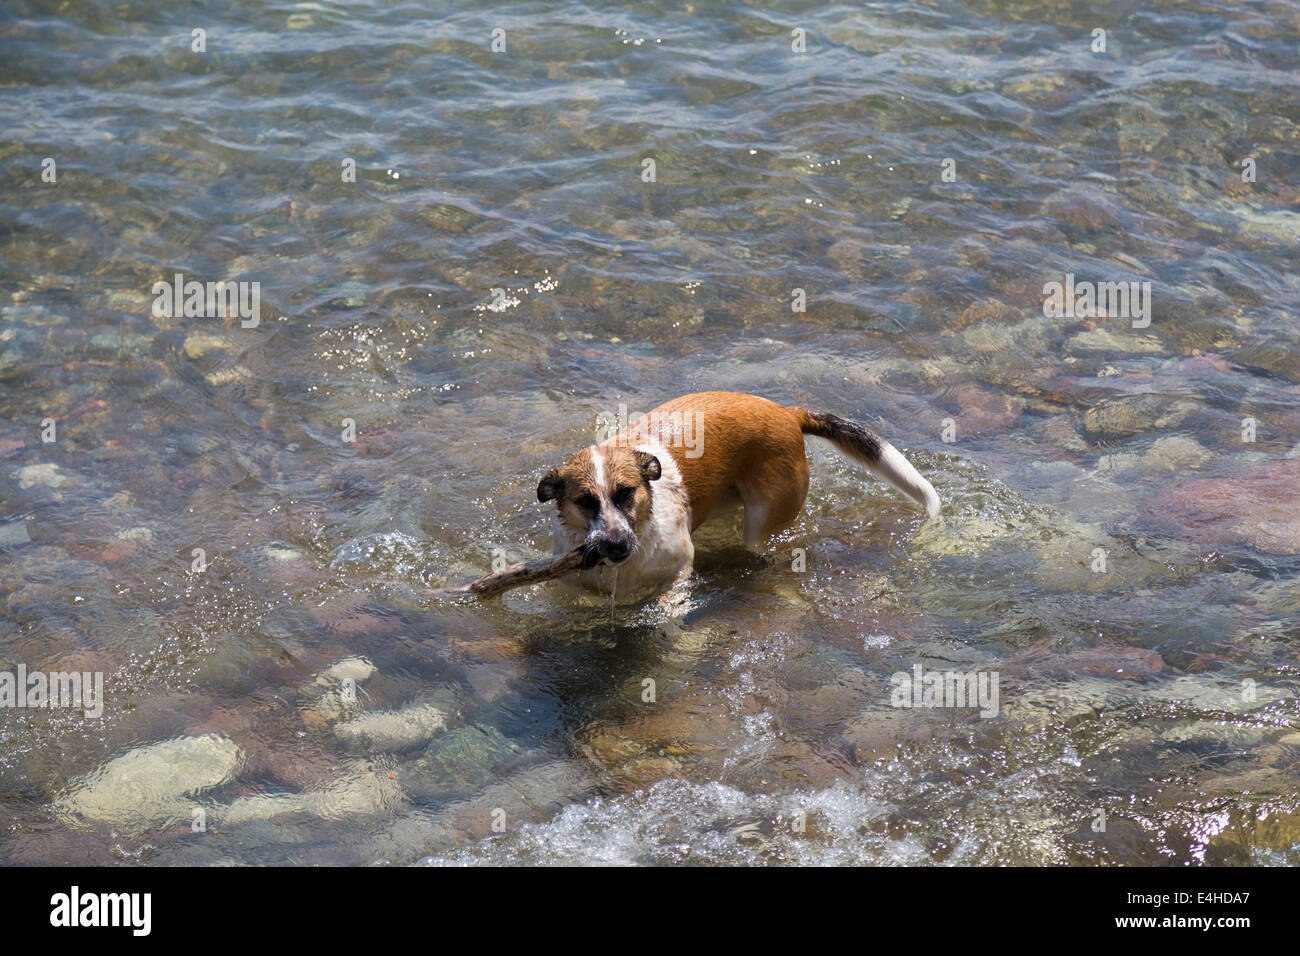 A dog in the water with a stick in it's mouth Stock Photo